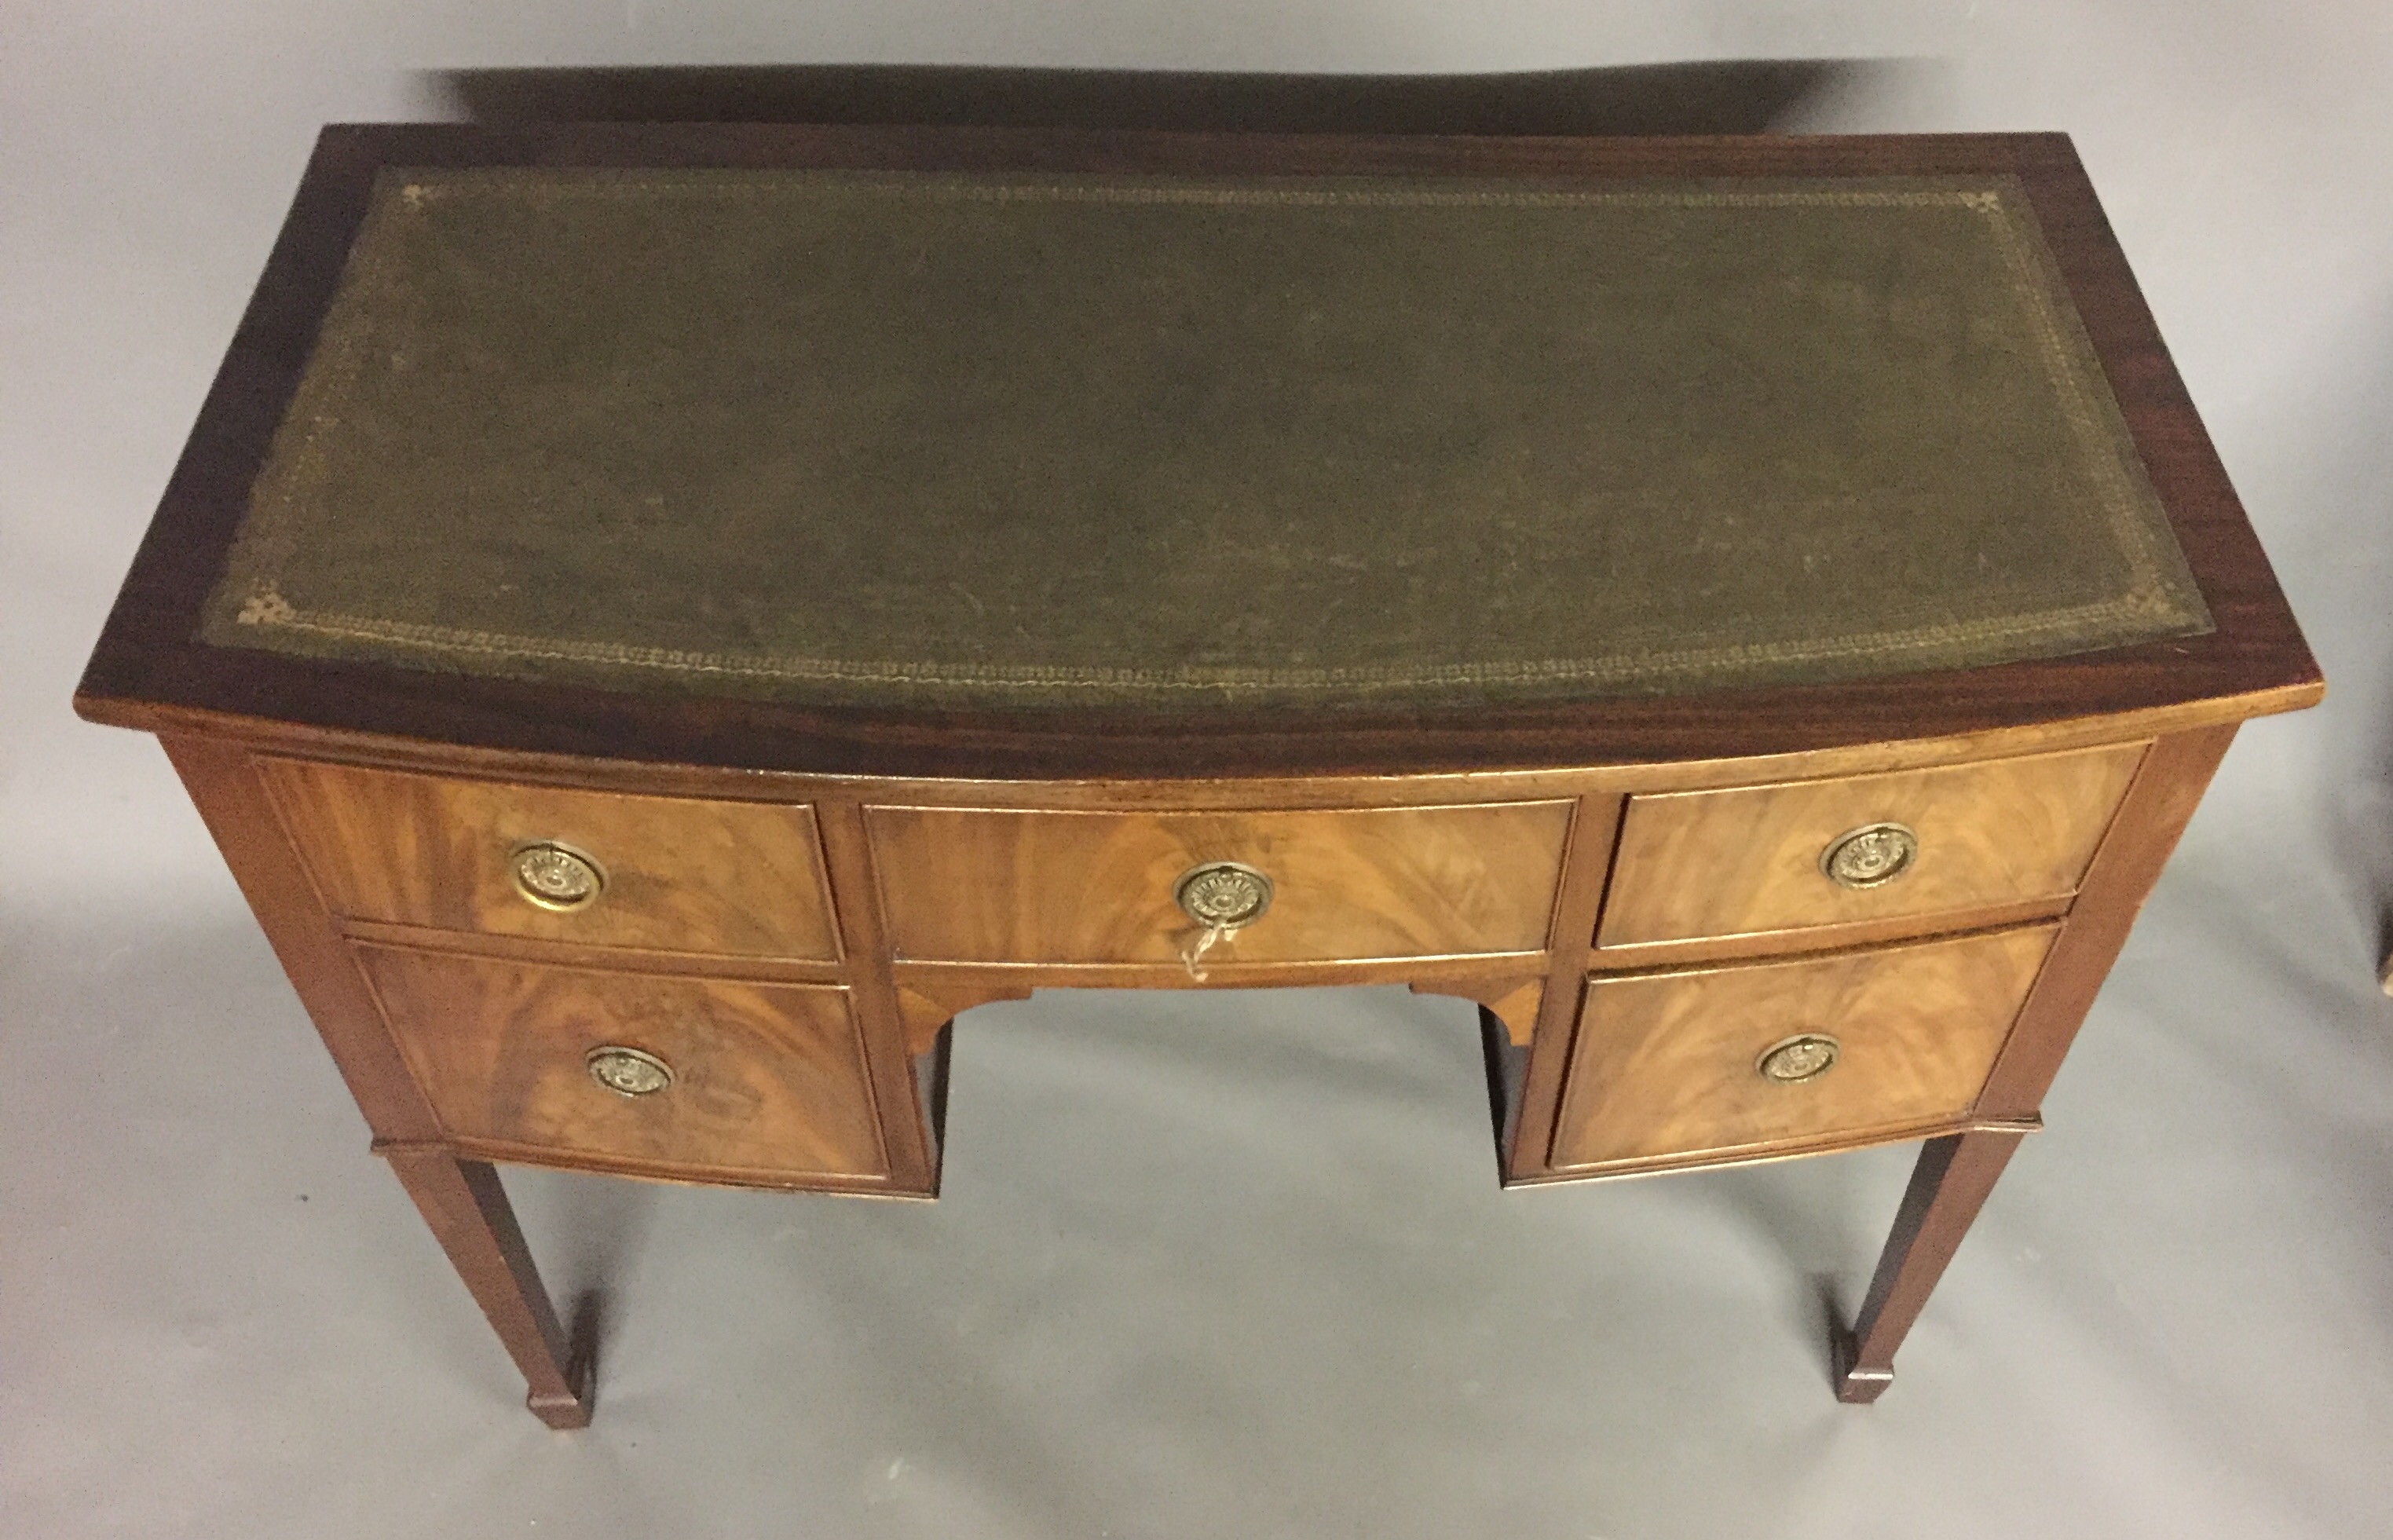 A REGENCY DESIGN MAHOGANY BOW FRONTED SIDE CABINET With green tooled leather writing surface above - Image 2 of 2